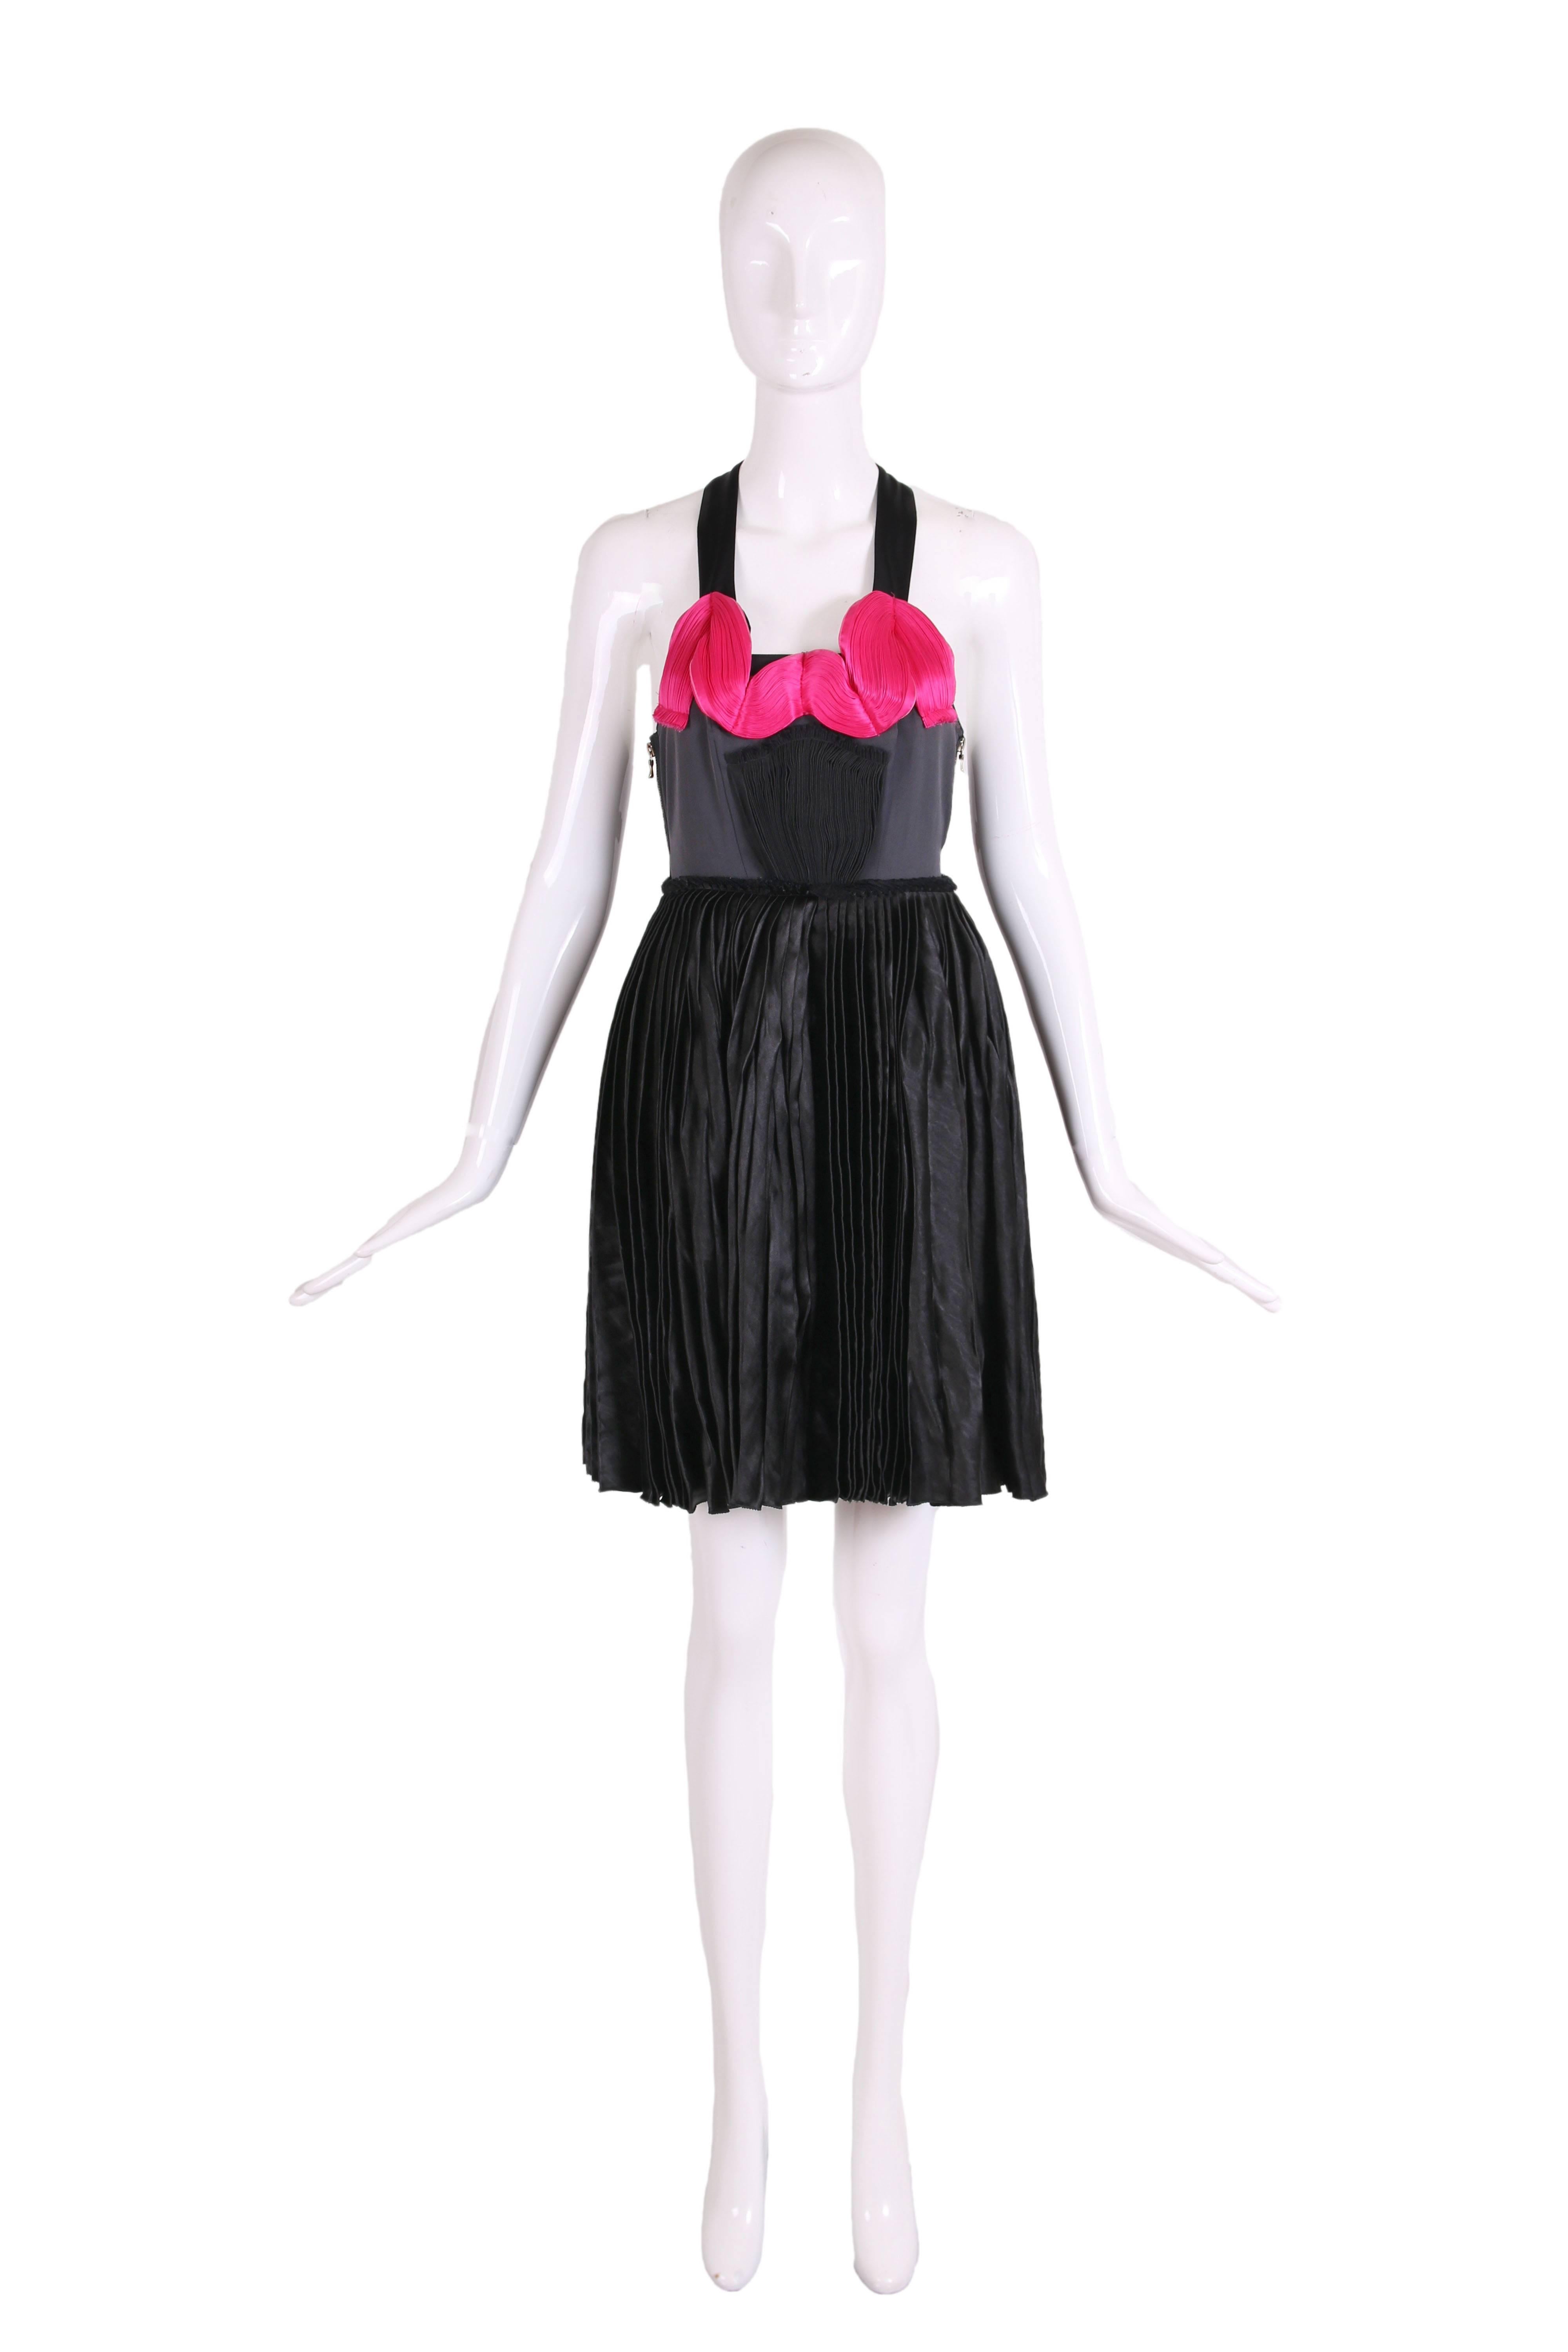 2007 Lanvin black silk, viscose and paper blend mini dress with pleating at the waistline and skirt, straps and hot pink silk pleated design detail at bust. Has two side zippers - one is a closure and the other is decorative. Size tag 36 - please